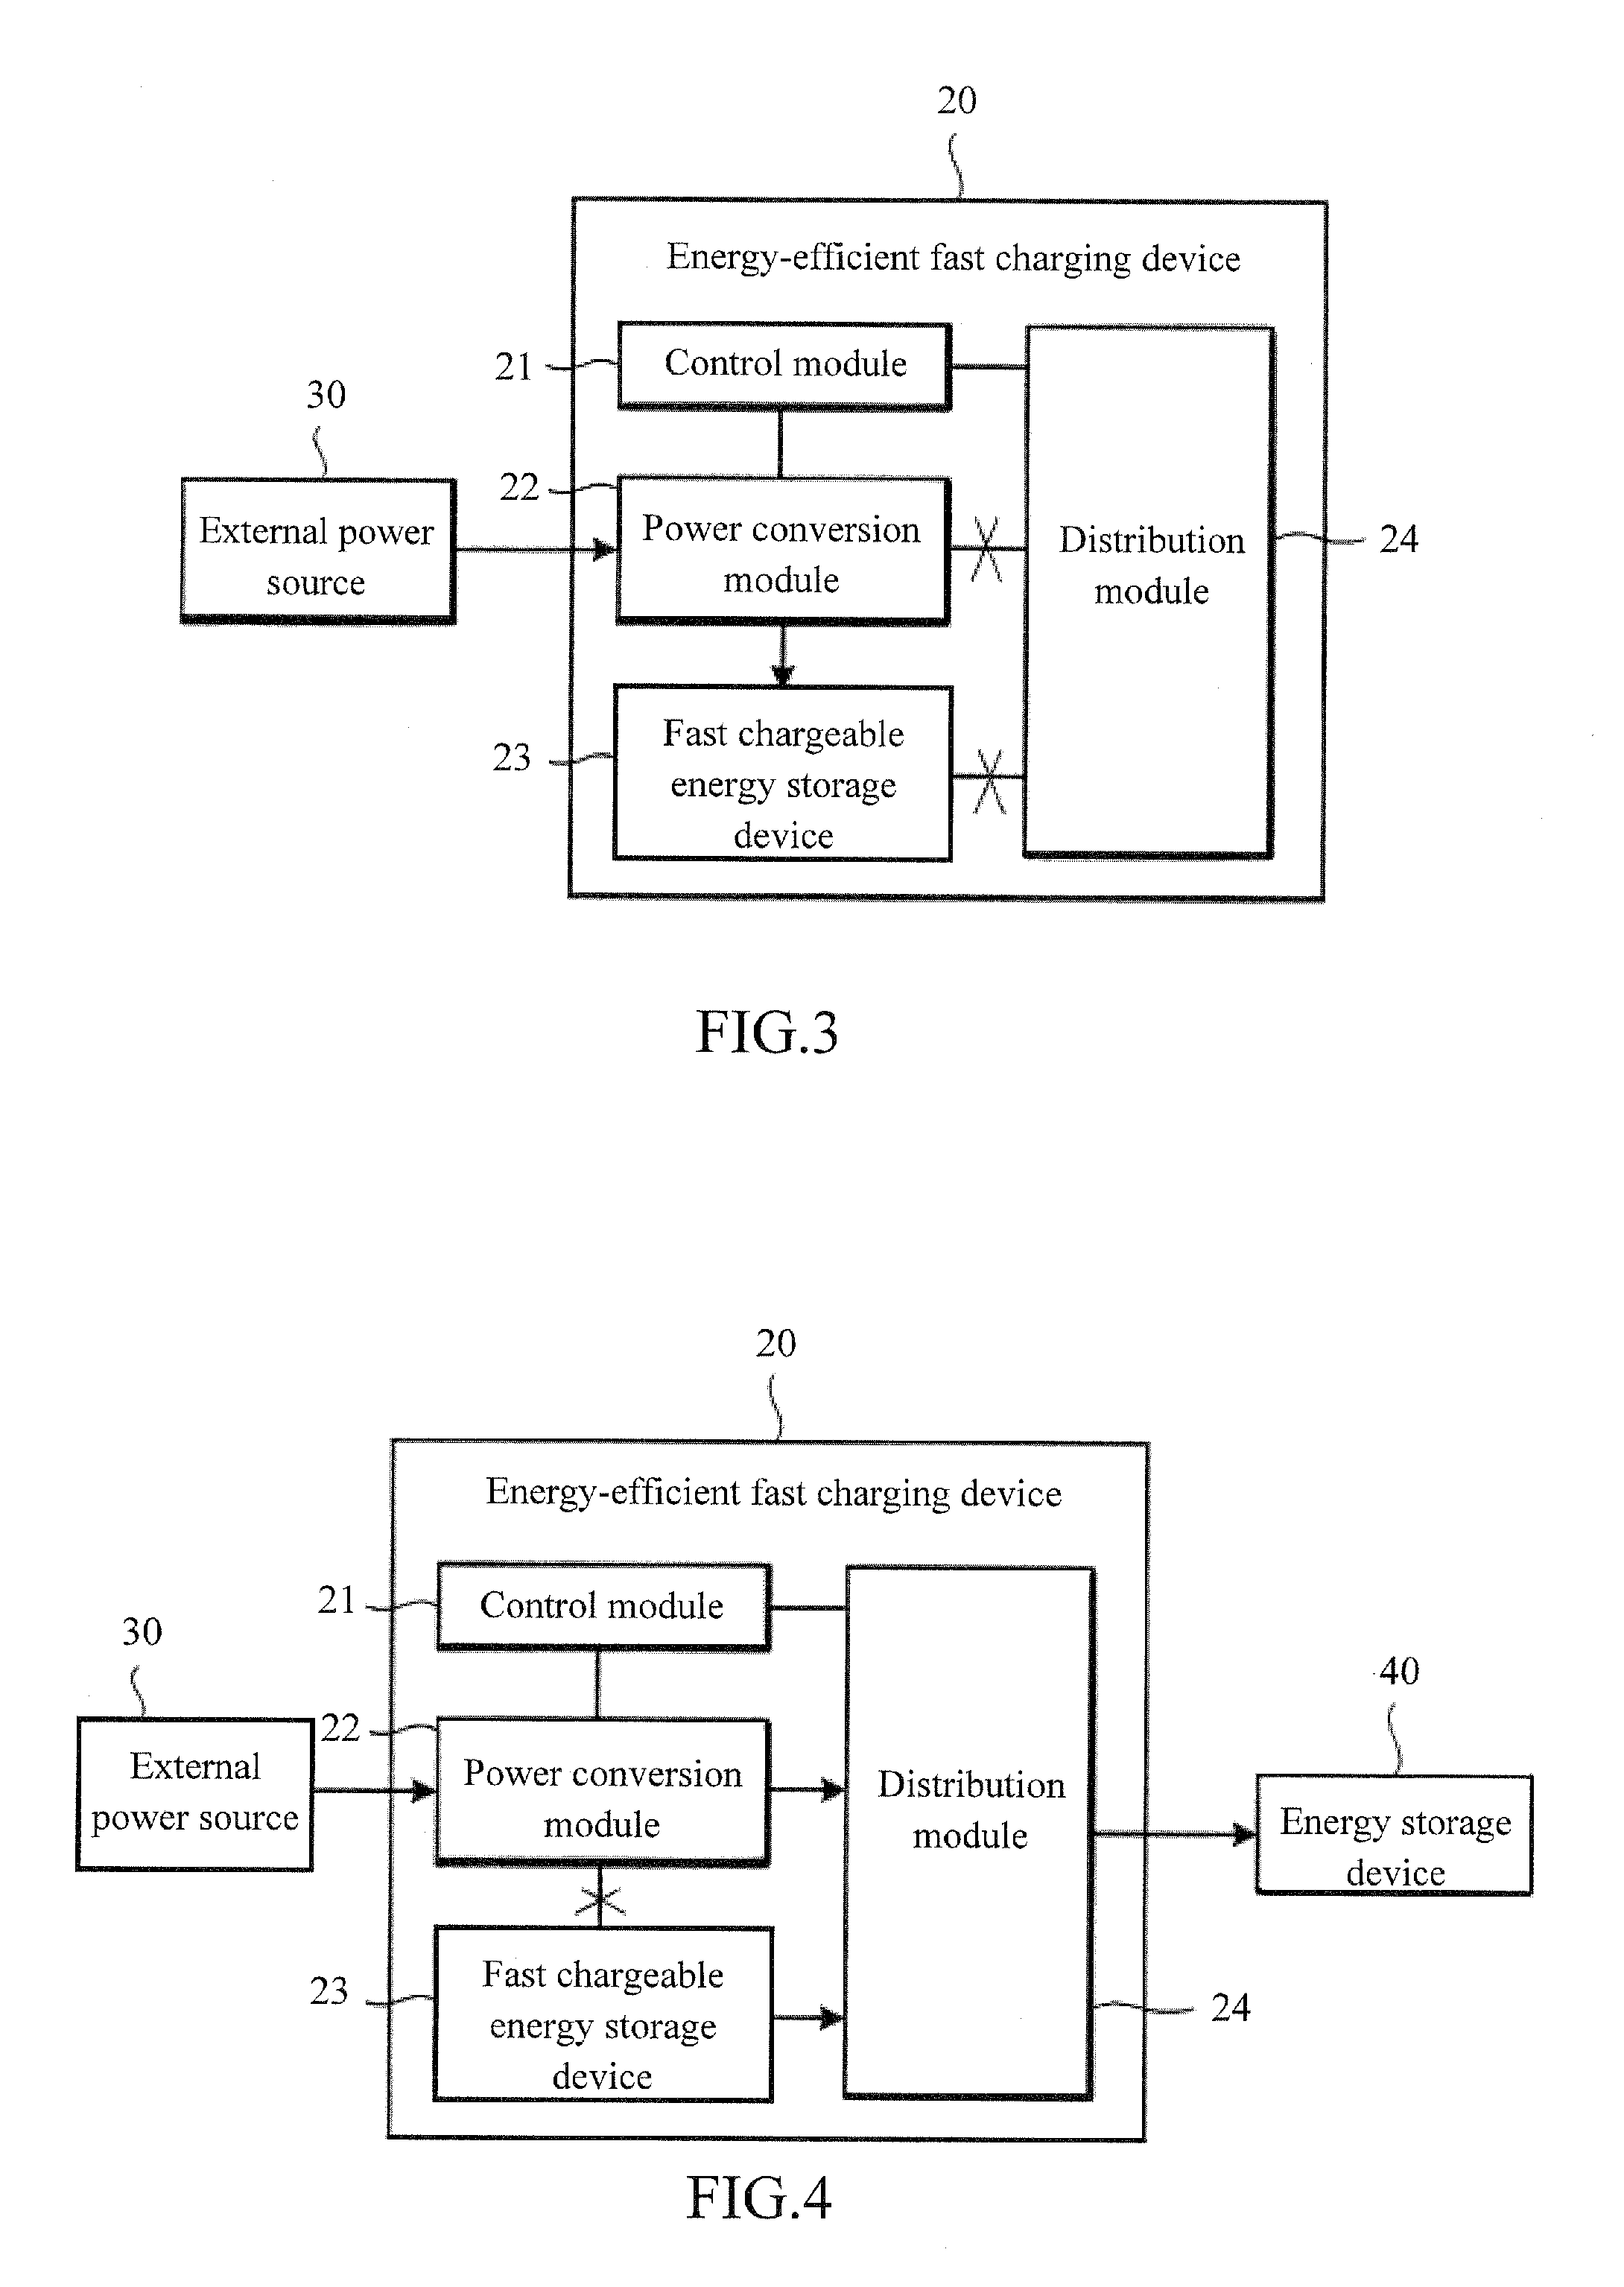 Energy-efficient fast charging device and method